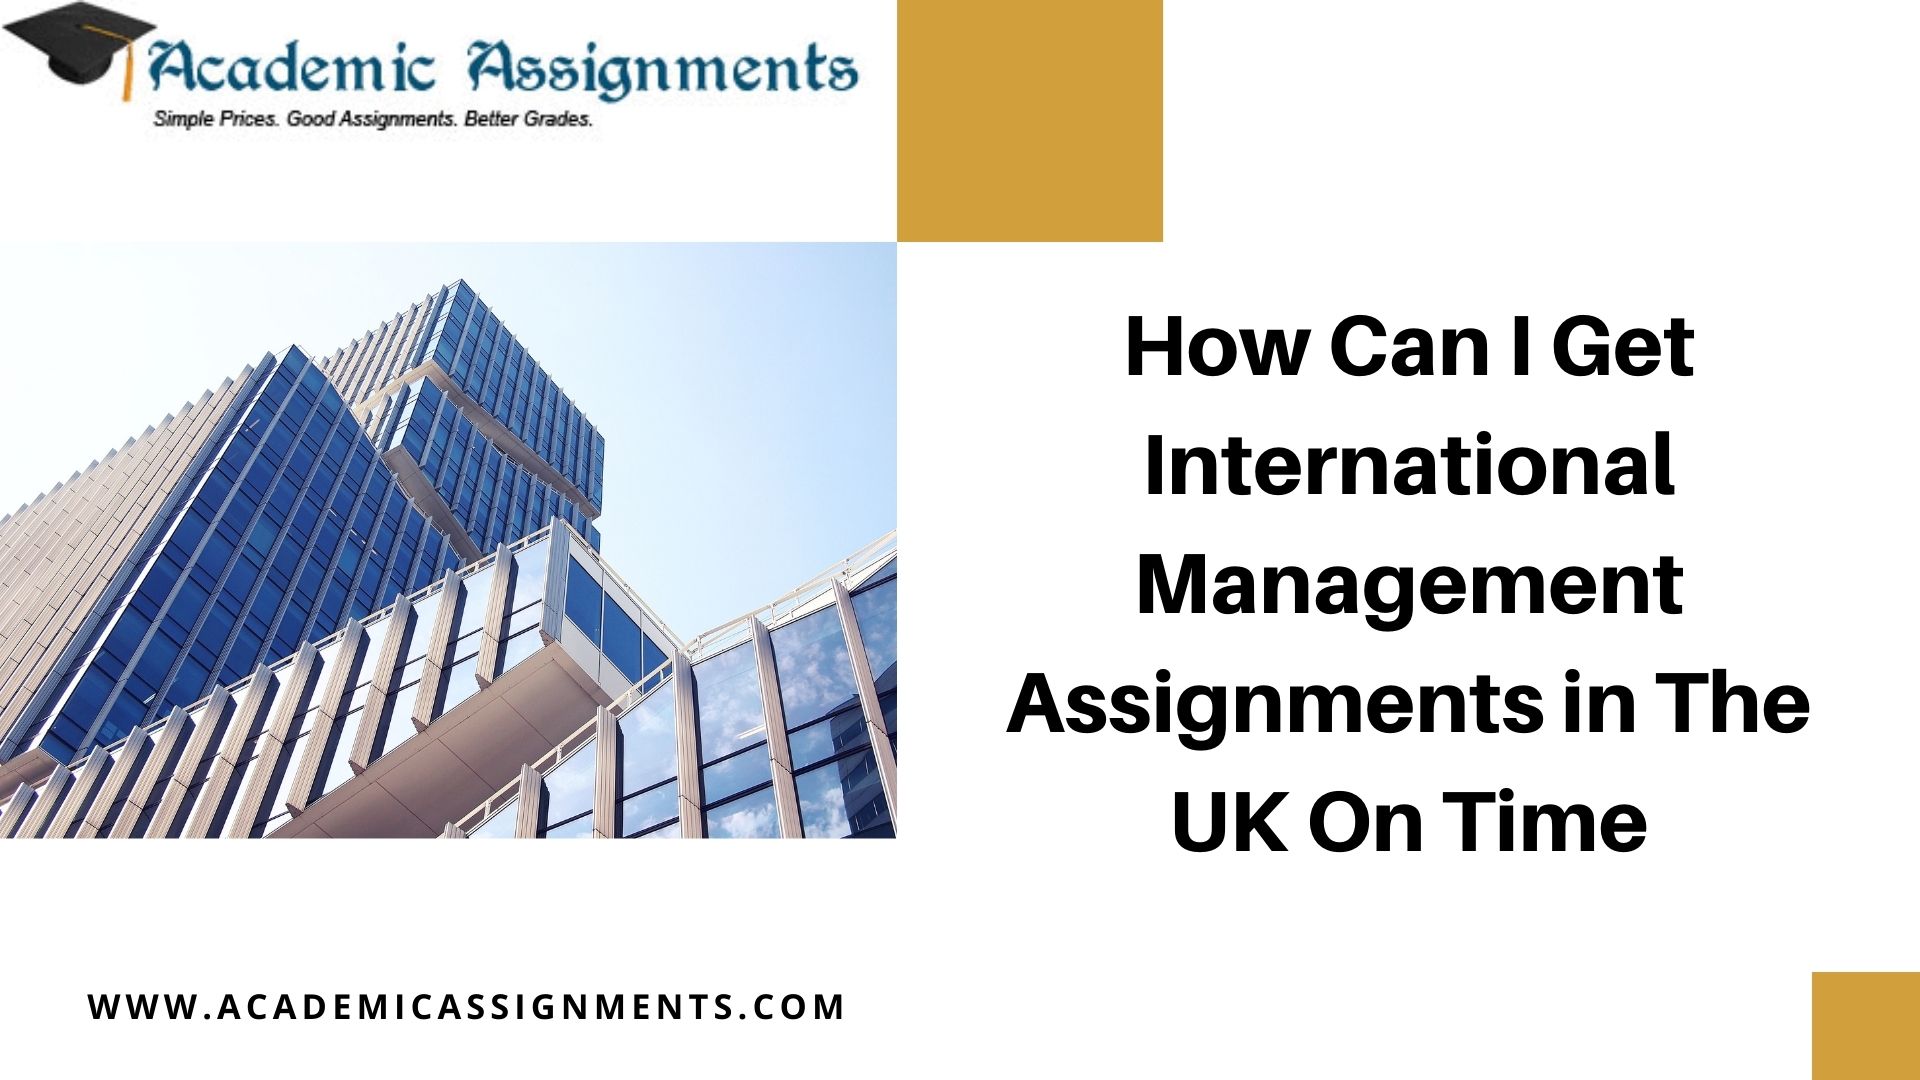 How Can I Get International Management Assignments in The UK On Time